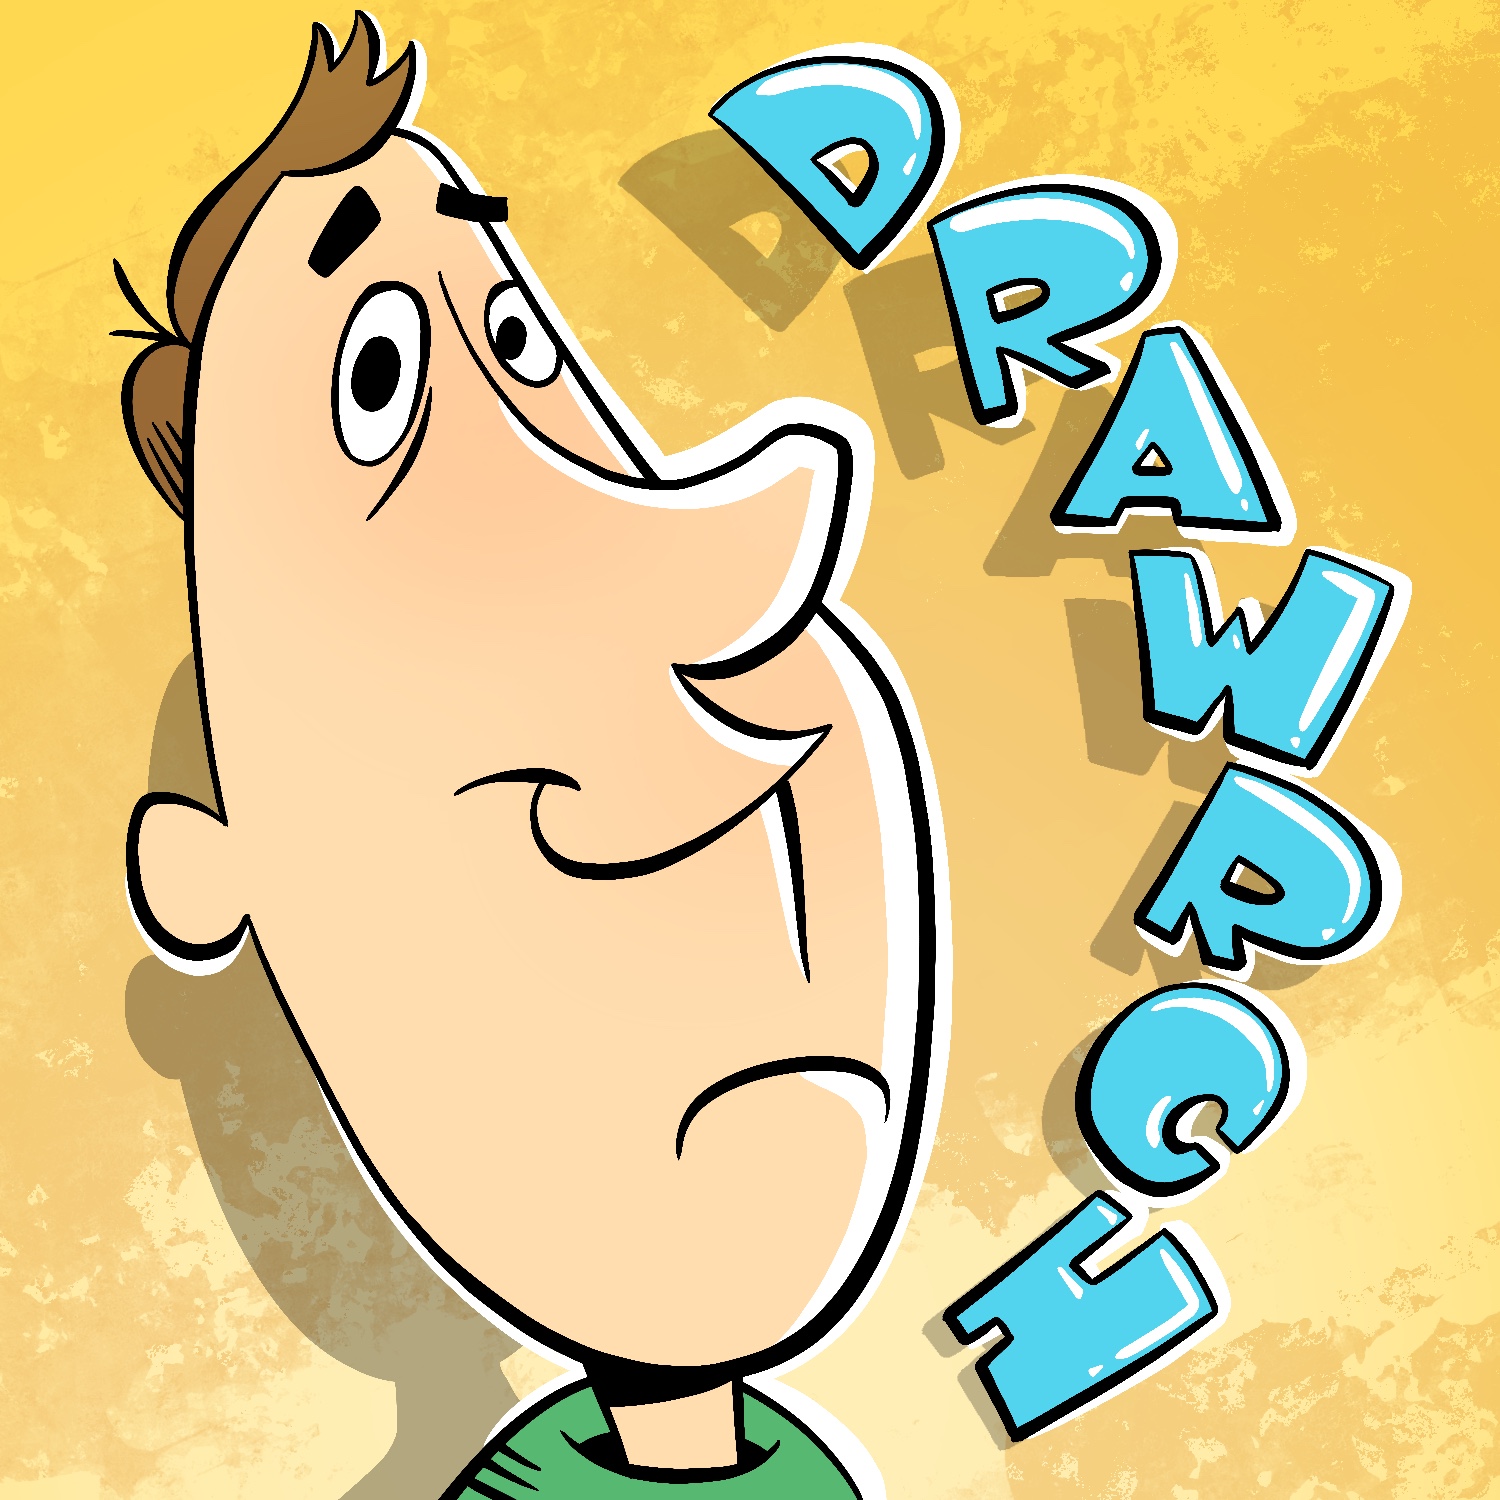 A retro-styled cartoon illustration of a man with a long face smiling and looking at the viewer. The man has a tuft of brown hair and is wearing a green shirt. The word "Drawrch" is written in chunky blue letters vertically down the right side of the image. The background is a textured yellow.